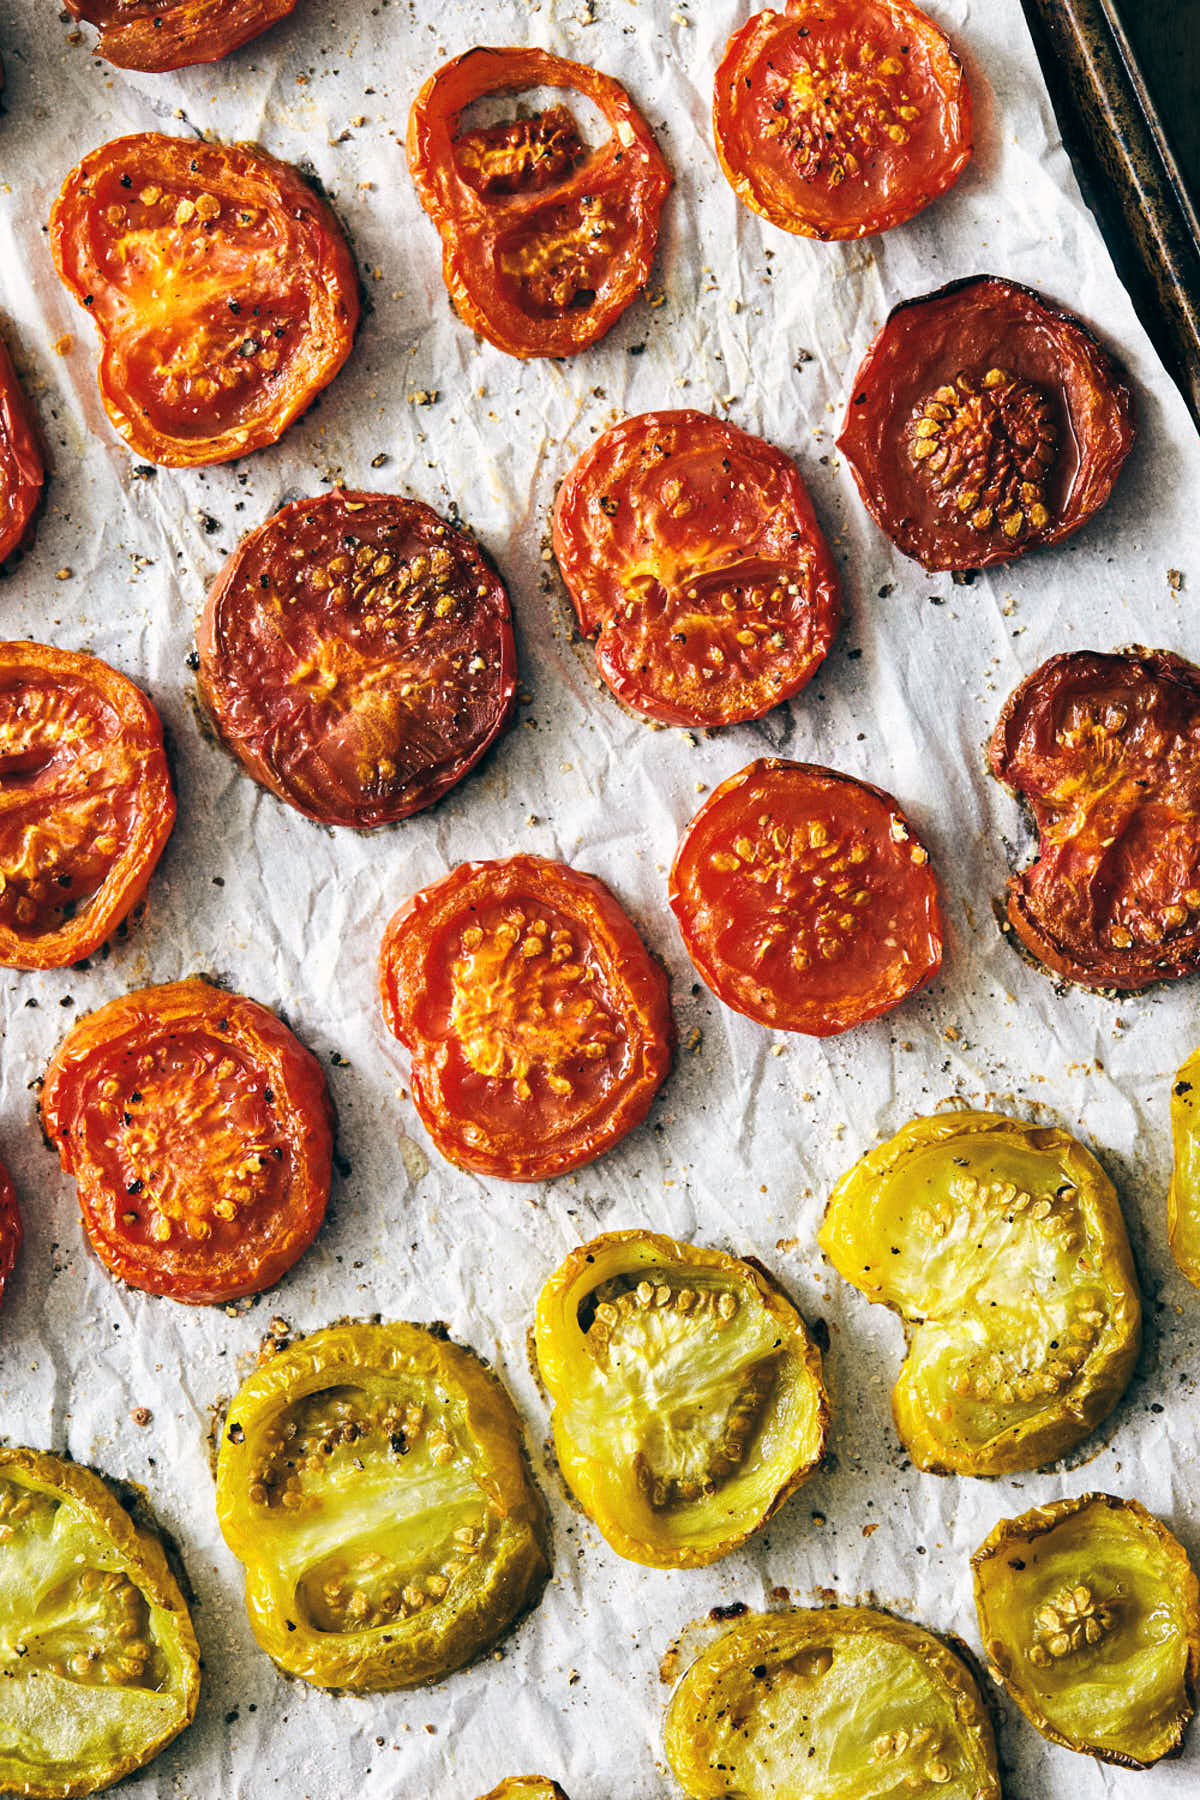 Roasted red and yellow heirloom tomatoes fresh out of the oven